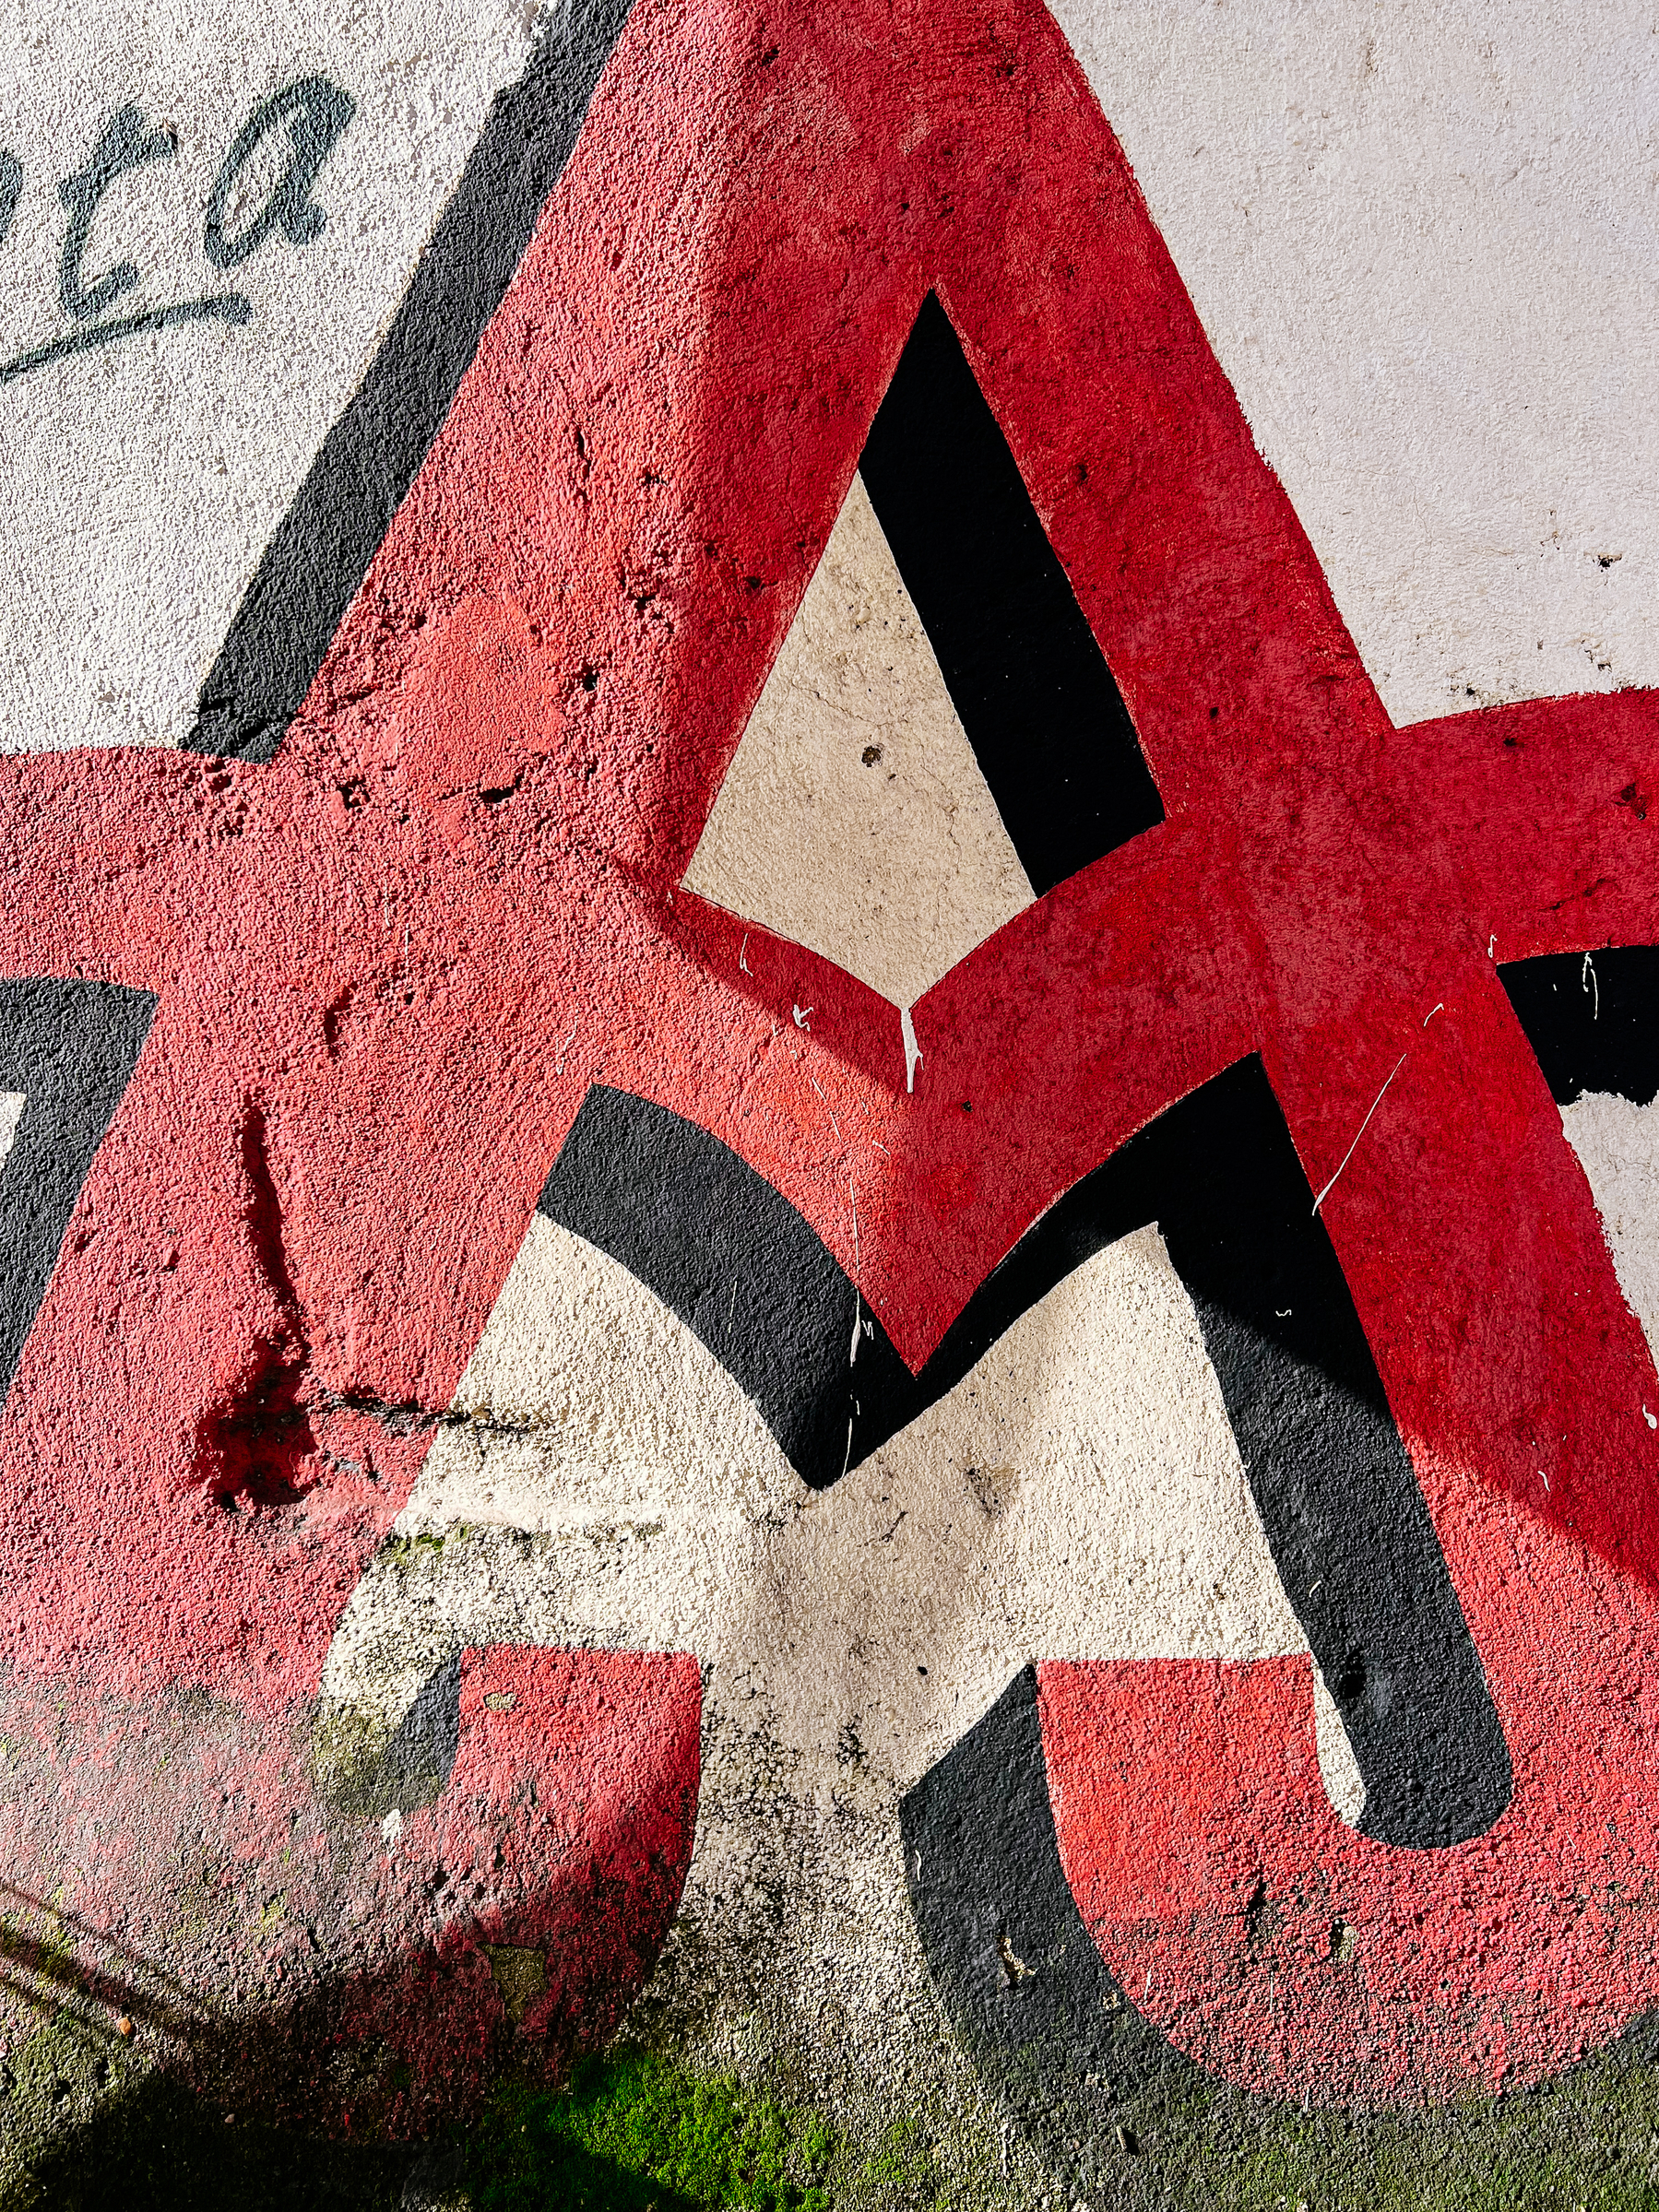 Graffiti of a red and black letter A on a textured wall.